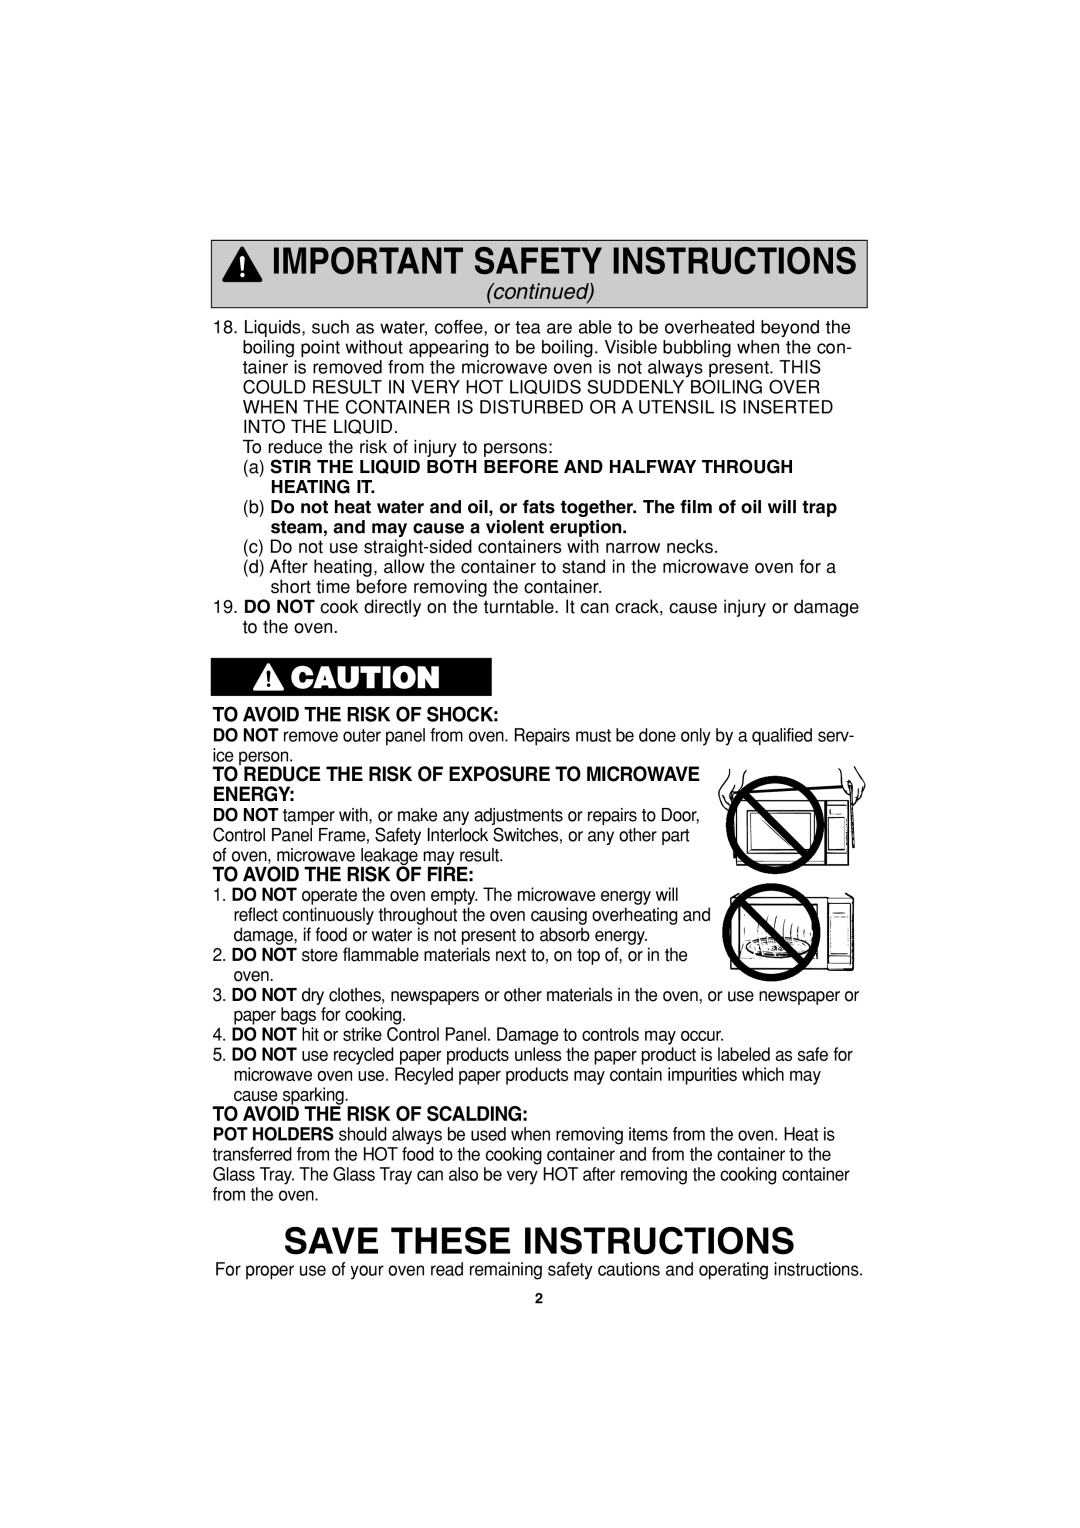 Panasonic NN-S753, NN-S953 Save These Instructions, continued, To Avoid The Risk Of Shock, To Avoid The Risk Of Fire 